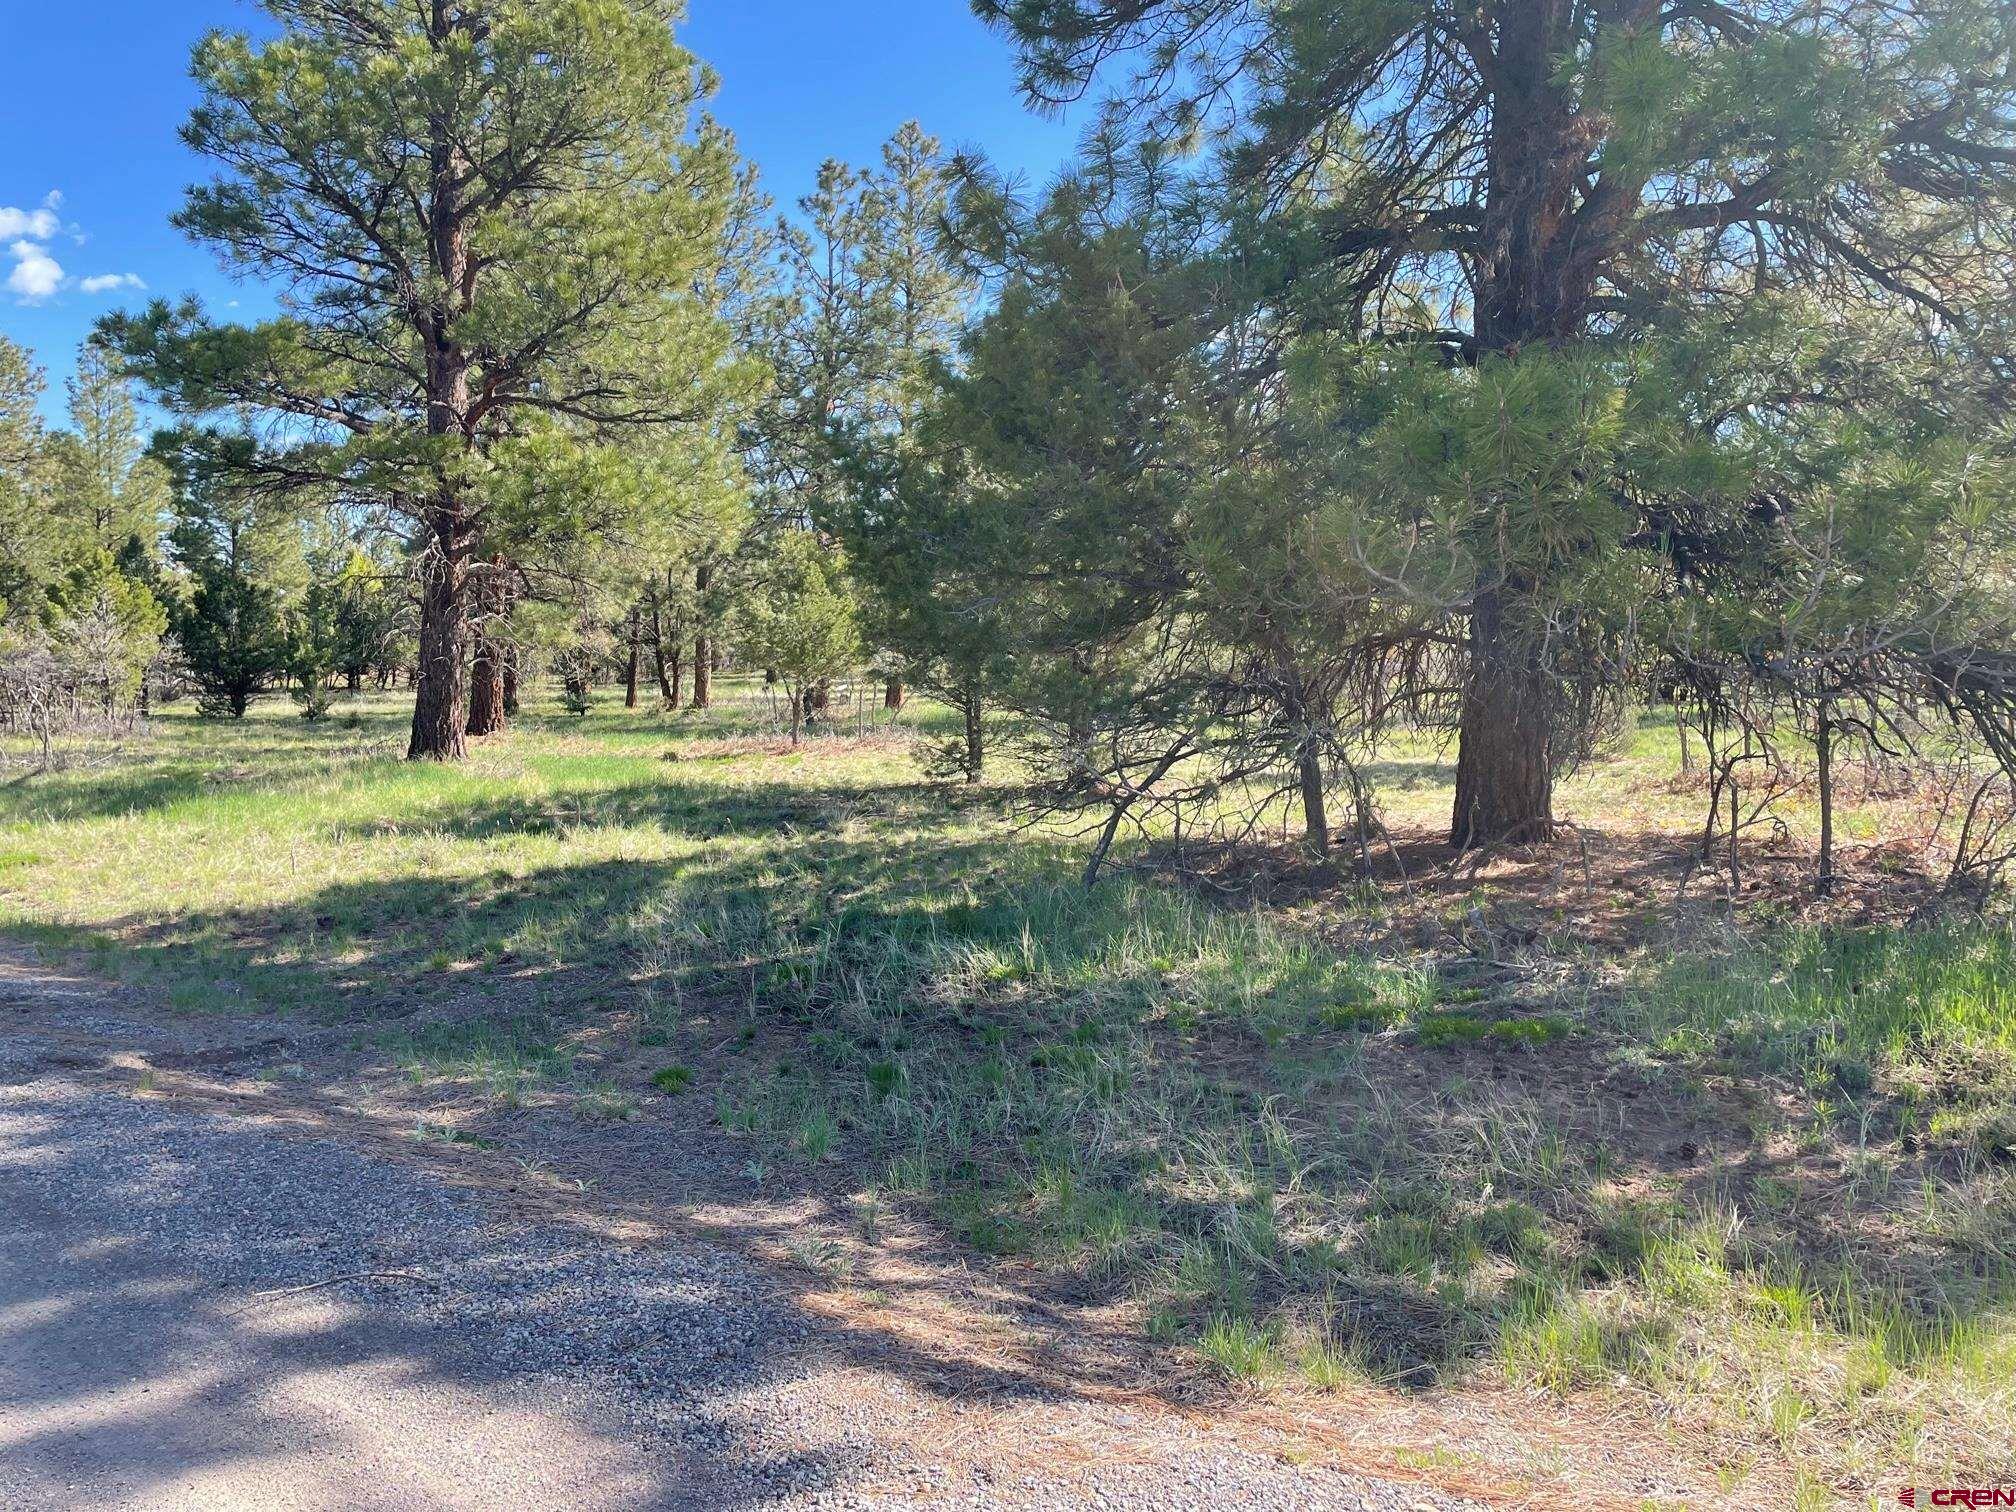 Generous one acre + corner lot in the Divide Ranch and Club Golf Course community. Level building site, nicely treed. Golf membership is included. The lot is a short walk to the beautiful clubhouse.  The stunning views, patio, bar and grill make for a relaxing golf experience. Paved roads, utilities to the lot line. One of the nicest mountain courses in the state of Colorado. Divide Ranch and Club is 45 mins away from world class skiing in Telluride, close to the Montrose airport, fly fishing, Ridgway State Park and Reservoir, boating, paddle board, kayaking and water skiing. Camping, jeeping, ice climbing, in the City of Ouray, the Little Switzerland of America.  This area is truly one the most beautiful areas in the State of Colorado. The Town of Ridgway, where the movie True Grit was filmed, has a beautiful Town park and play ground. Library, bike path to the reservoir past Dennis Weaver Park, shops, restaurants, bars and The Ridgway Railroad Museum. Wildlife is abundant.  The Million Dollar Highway, Alpine Loop and The Durango Silverton Narrow Gauge Train are all assessable.  Come build your dream home in this beautiful community.